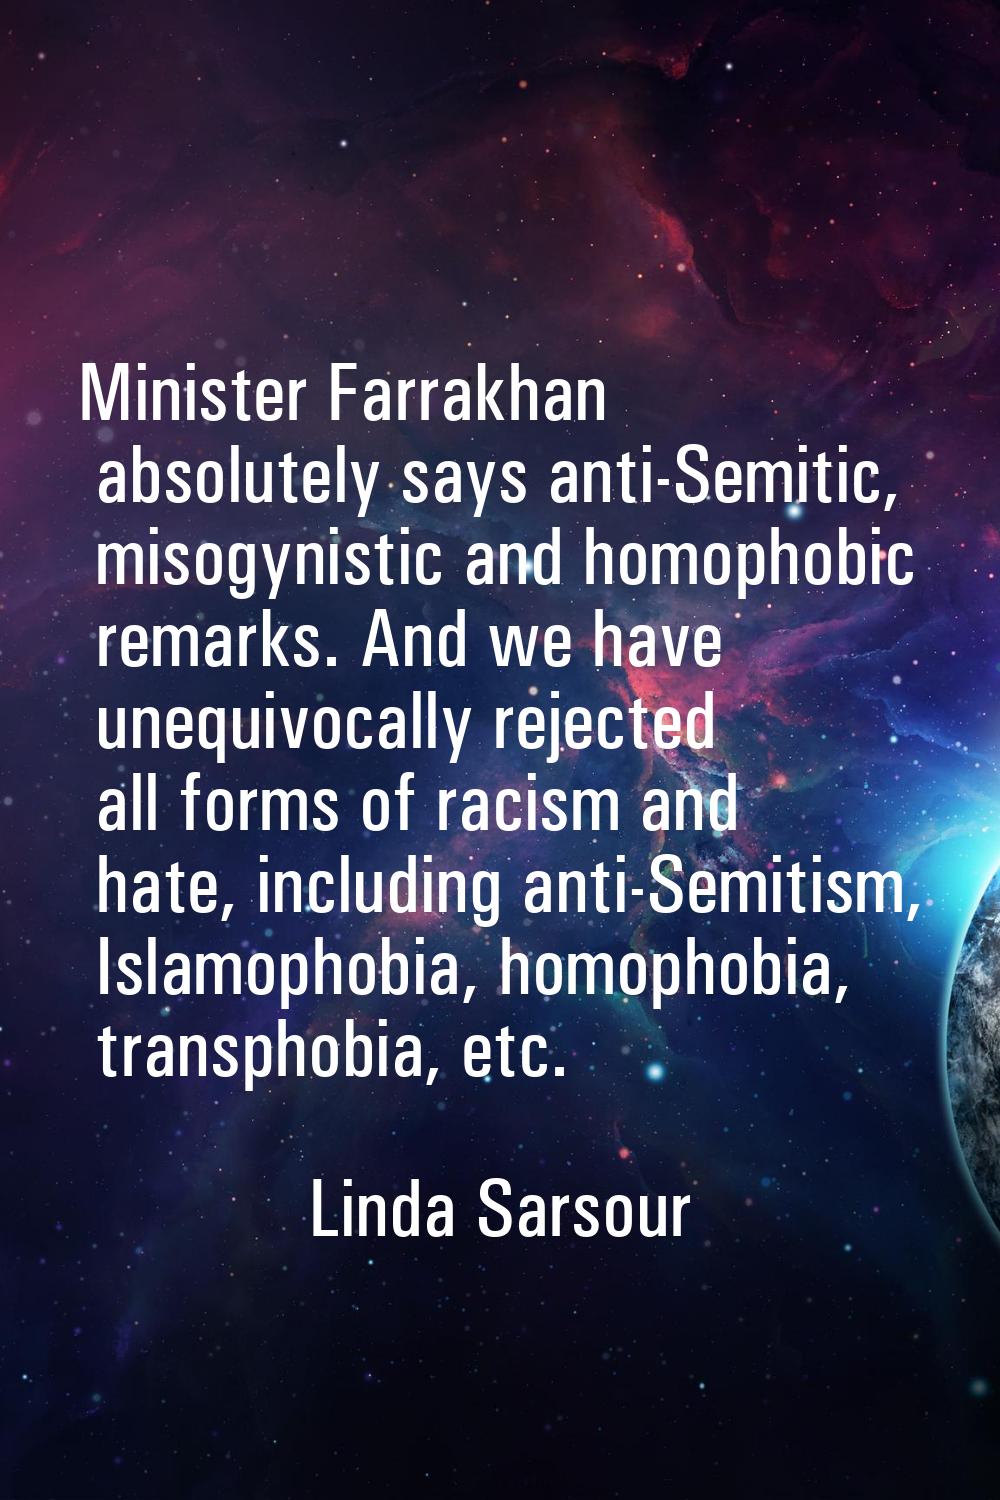 Minister Farrakhan absolutely says anti-Semitic, misogynistic and homophobic remarks. And we have u